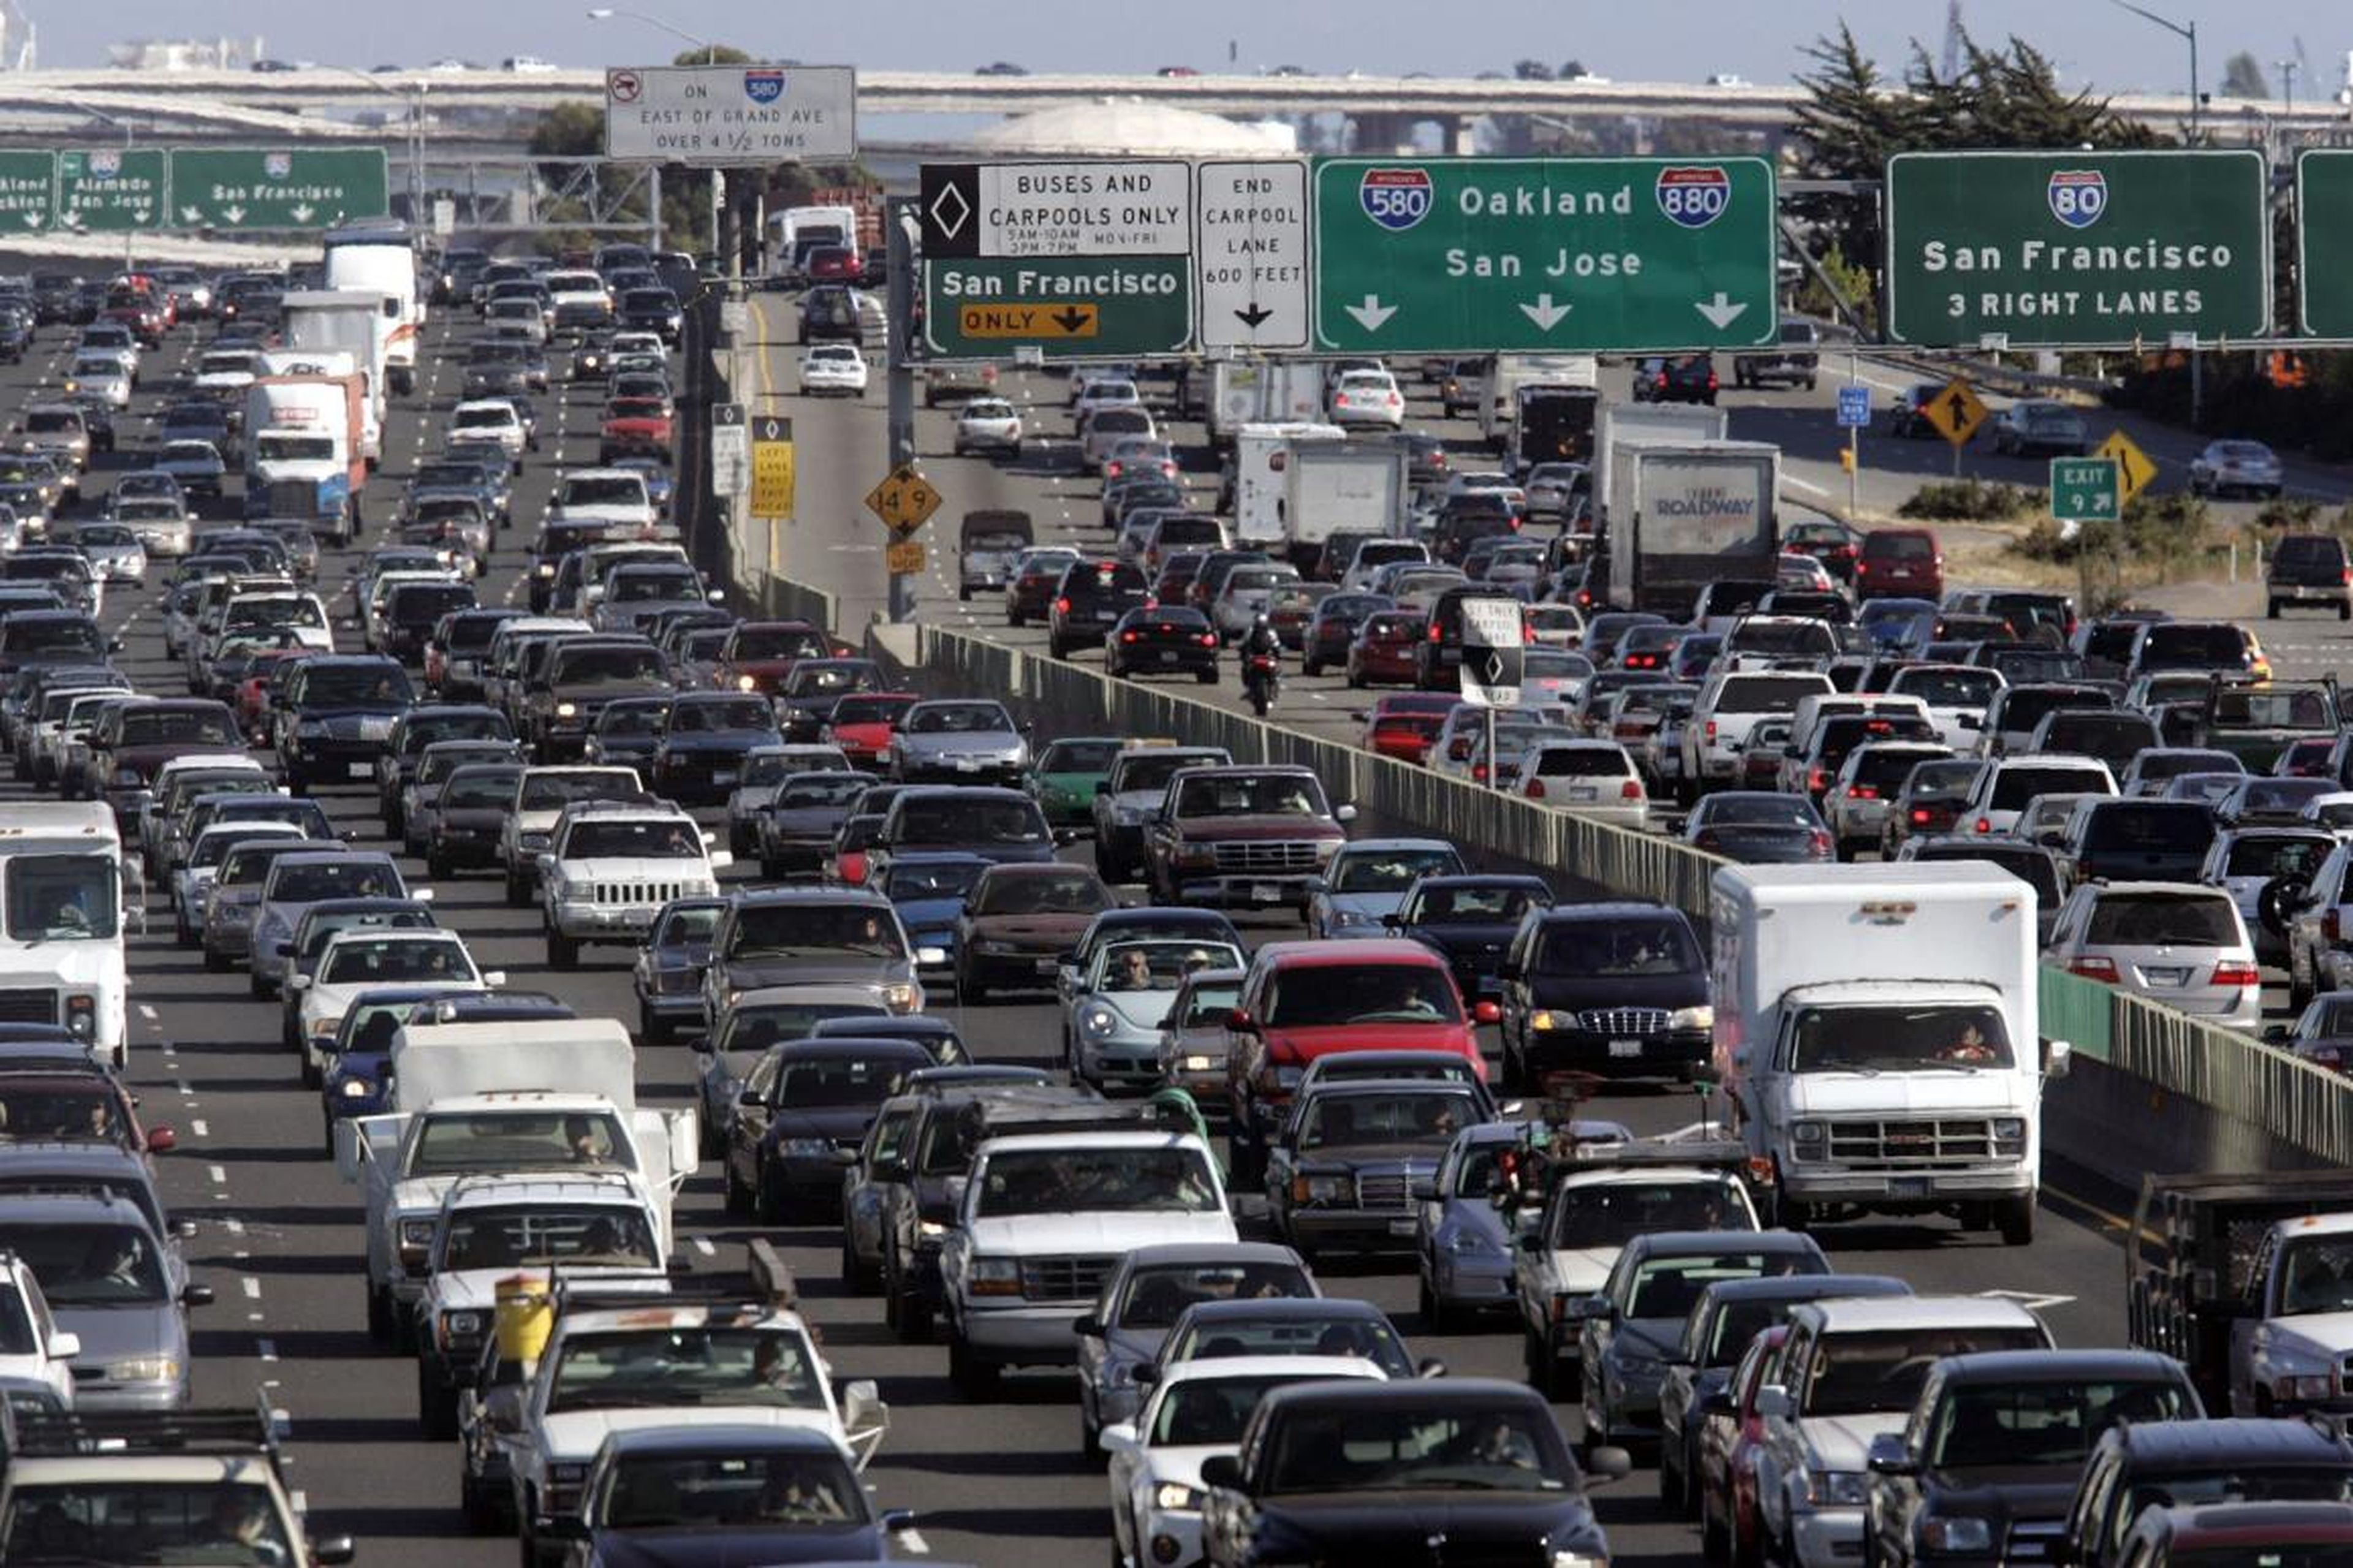 Drivers in San Francisco spends an average of 79 hours stuck in traffic.